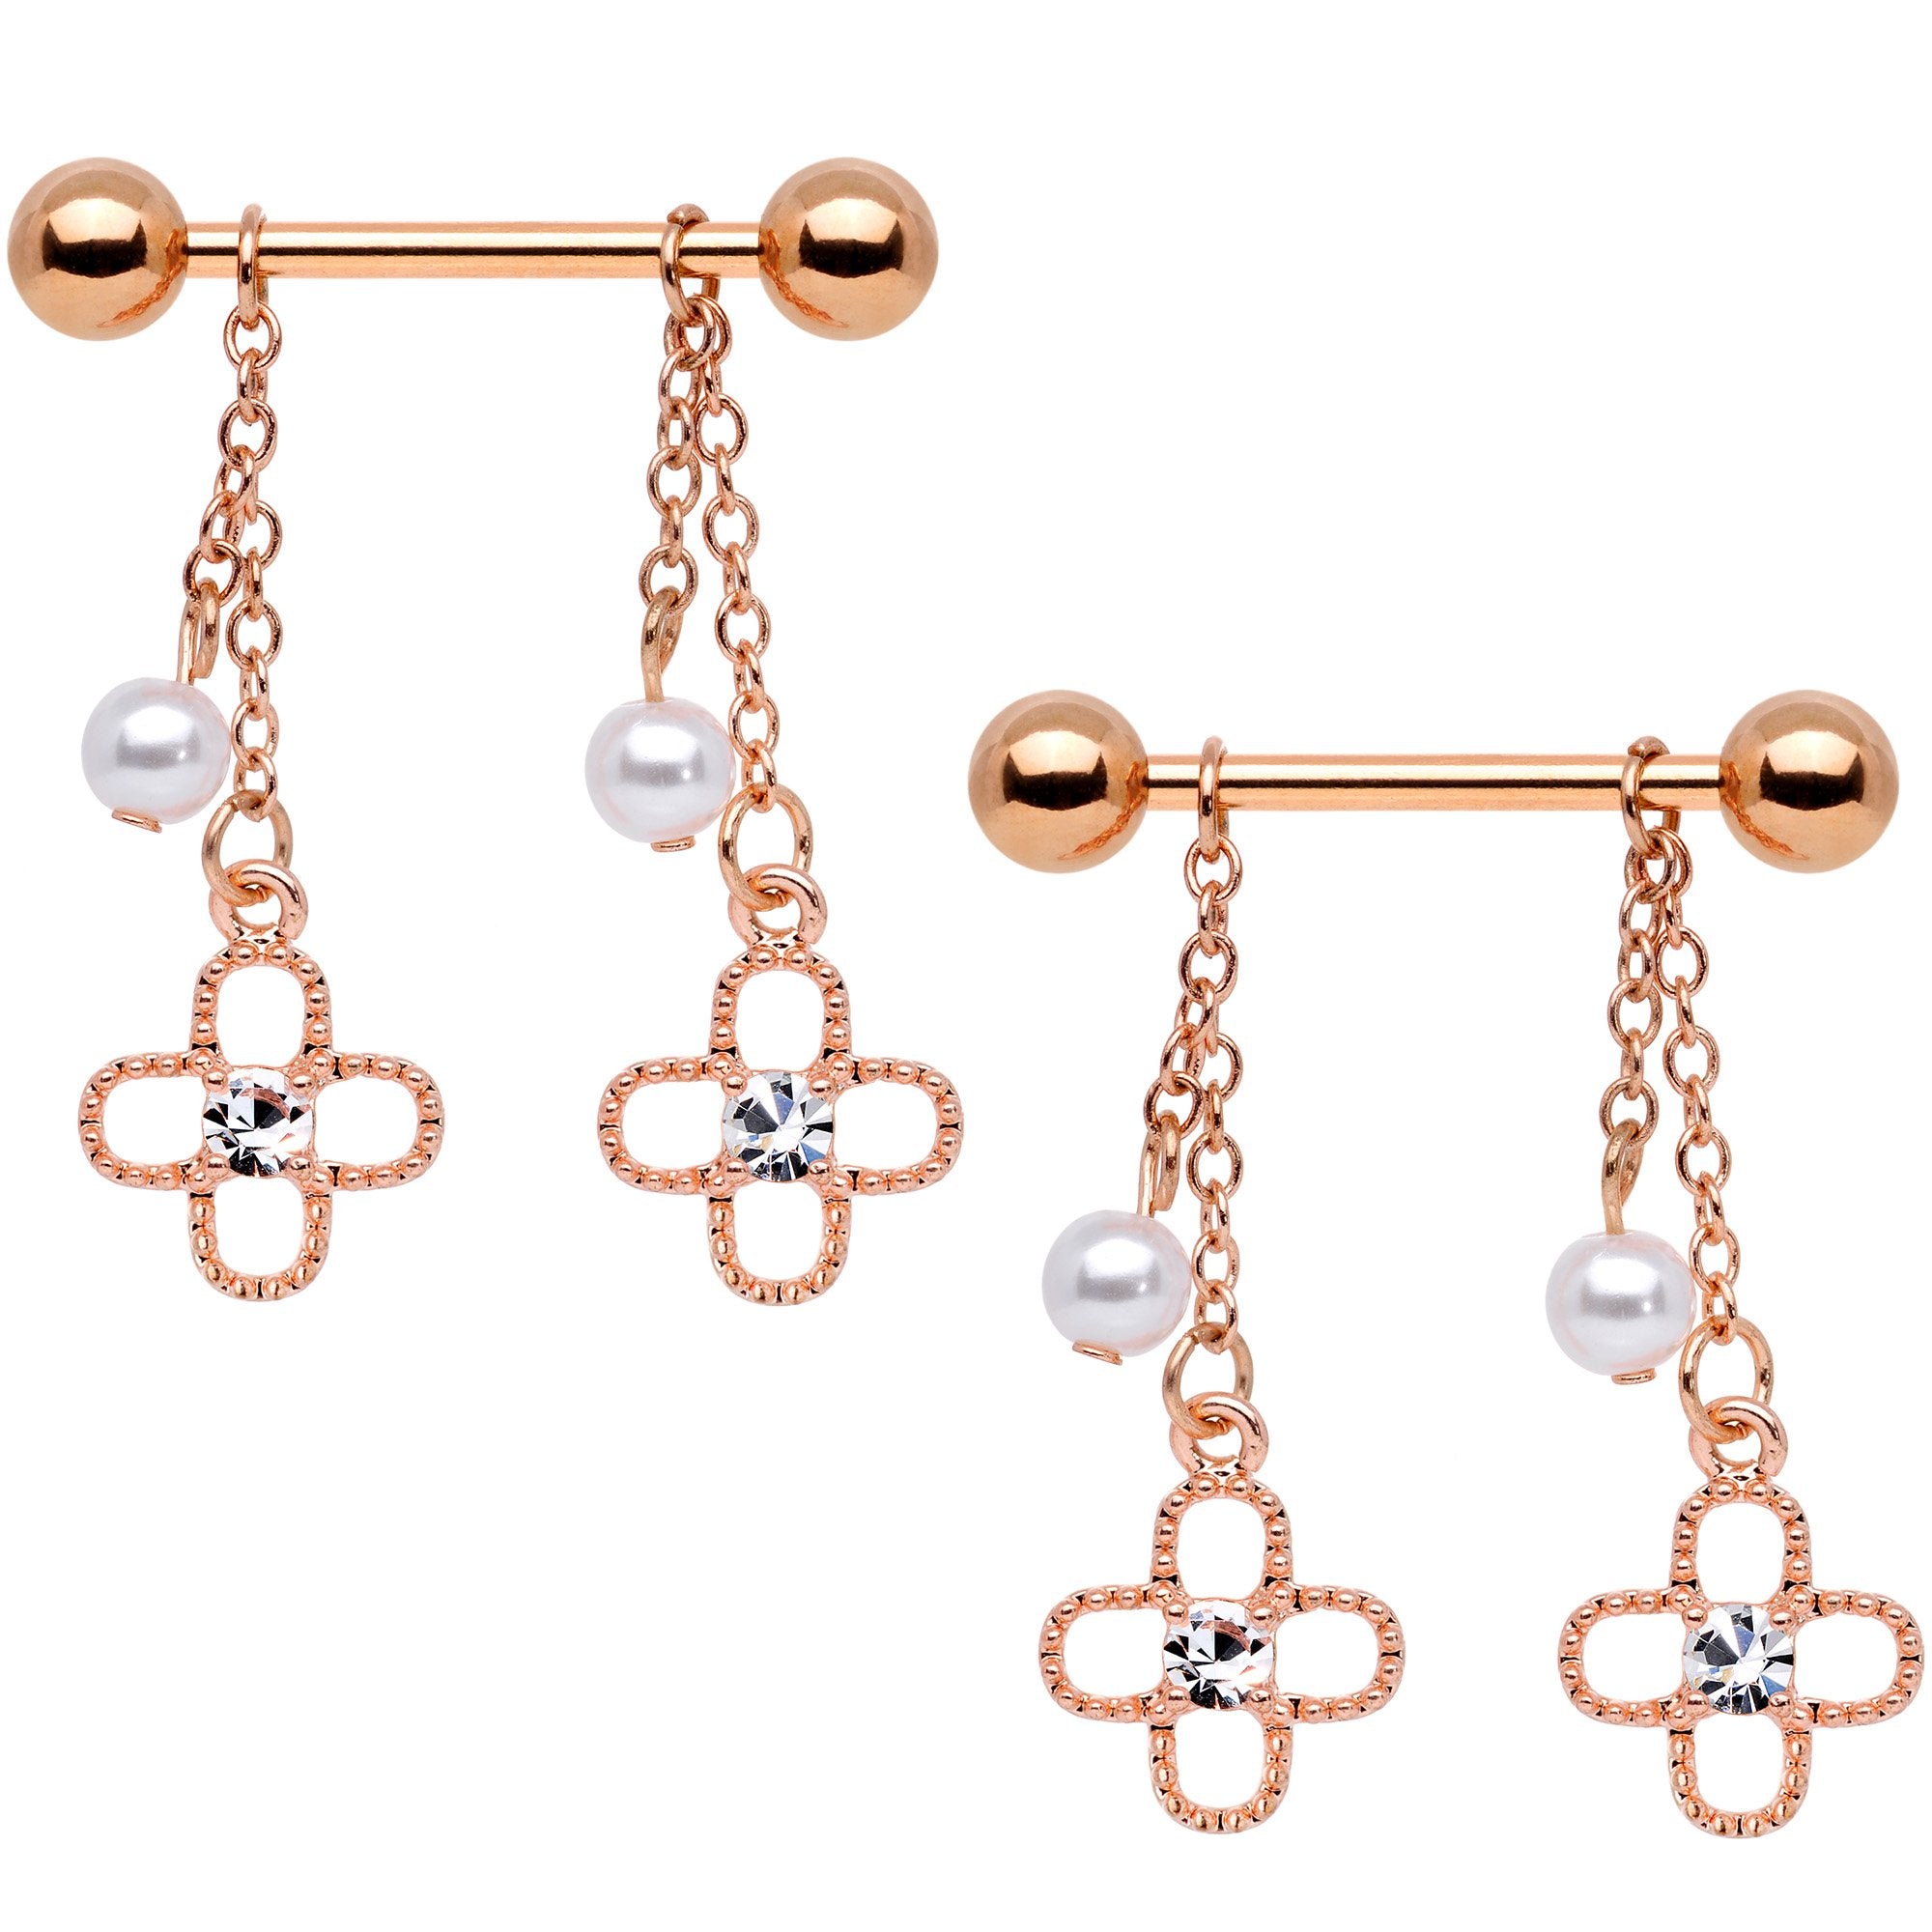 Clear Gem Rose Gold Tone Anodized Plus Dangle Barbell Nipple Ring Set